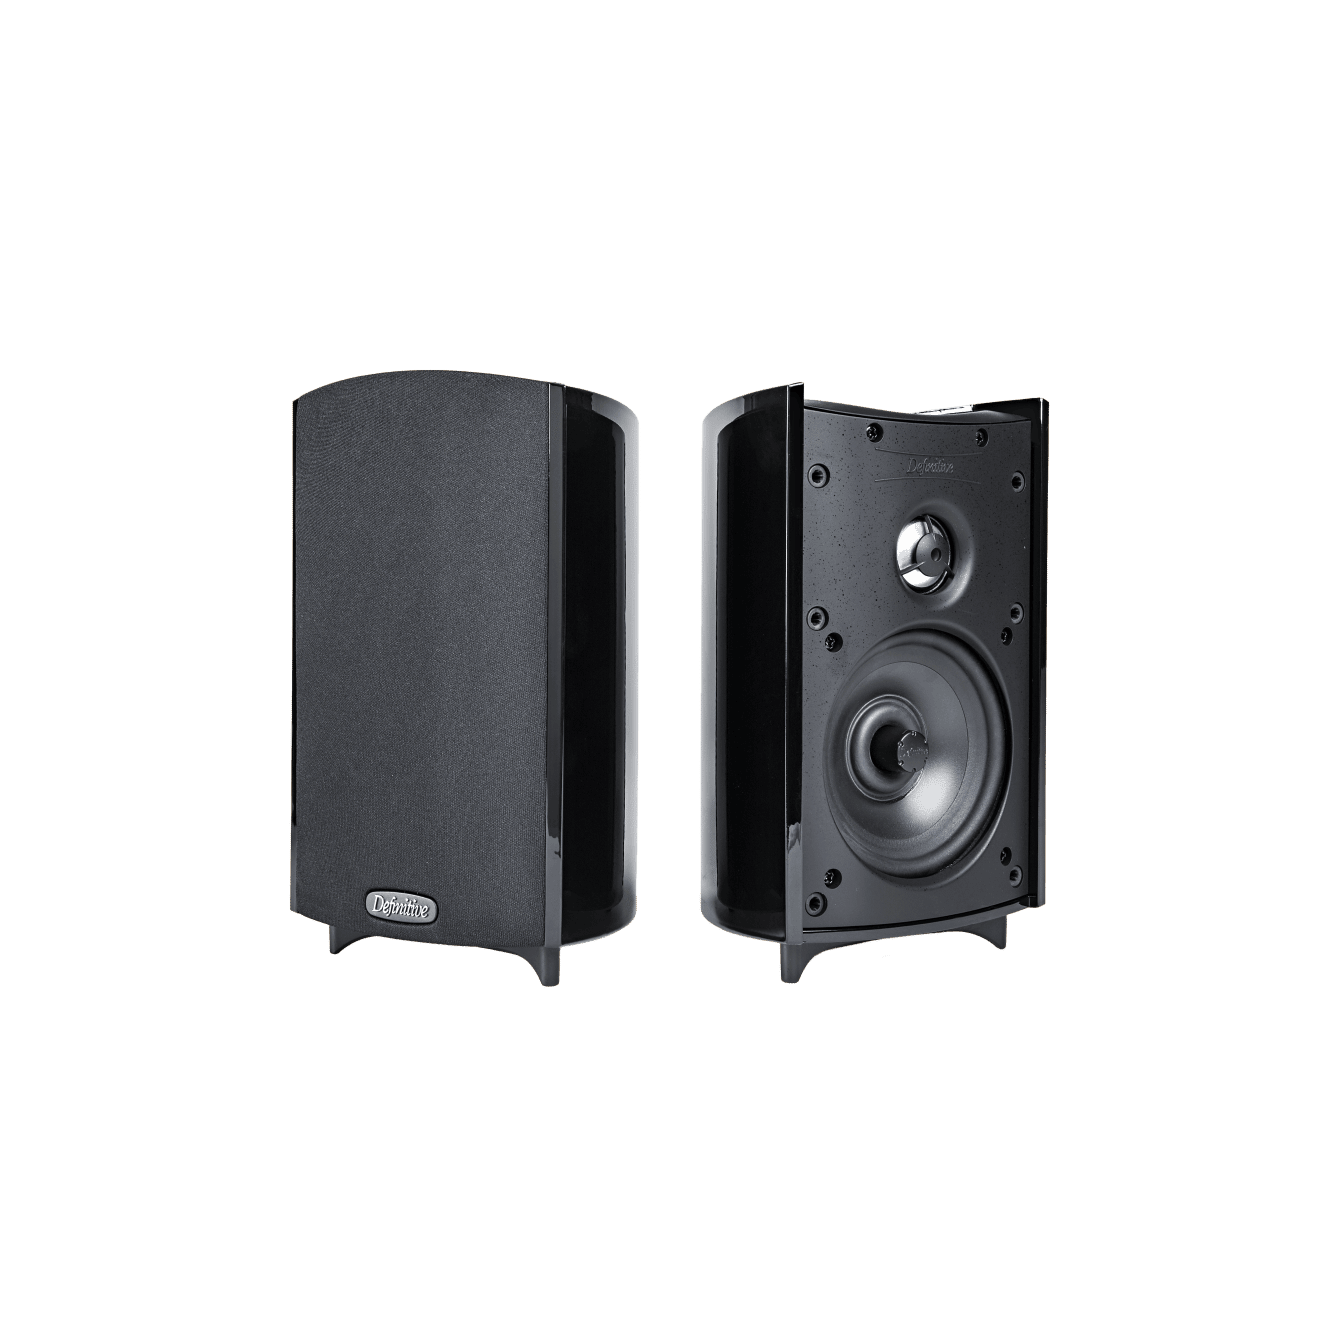 Definitive Technology ProMonitor 800 Compact High-Definition Satellite Speakers